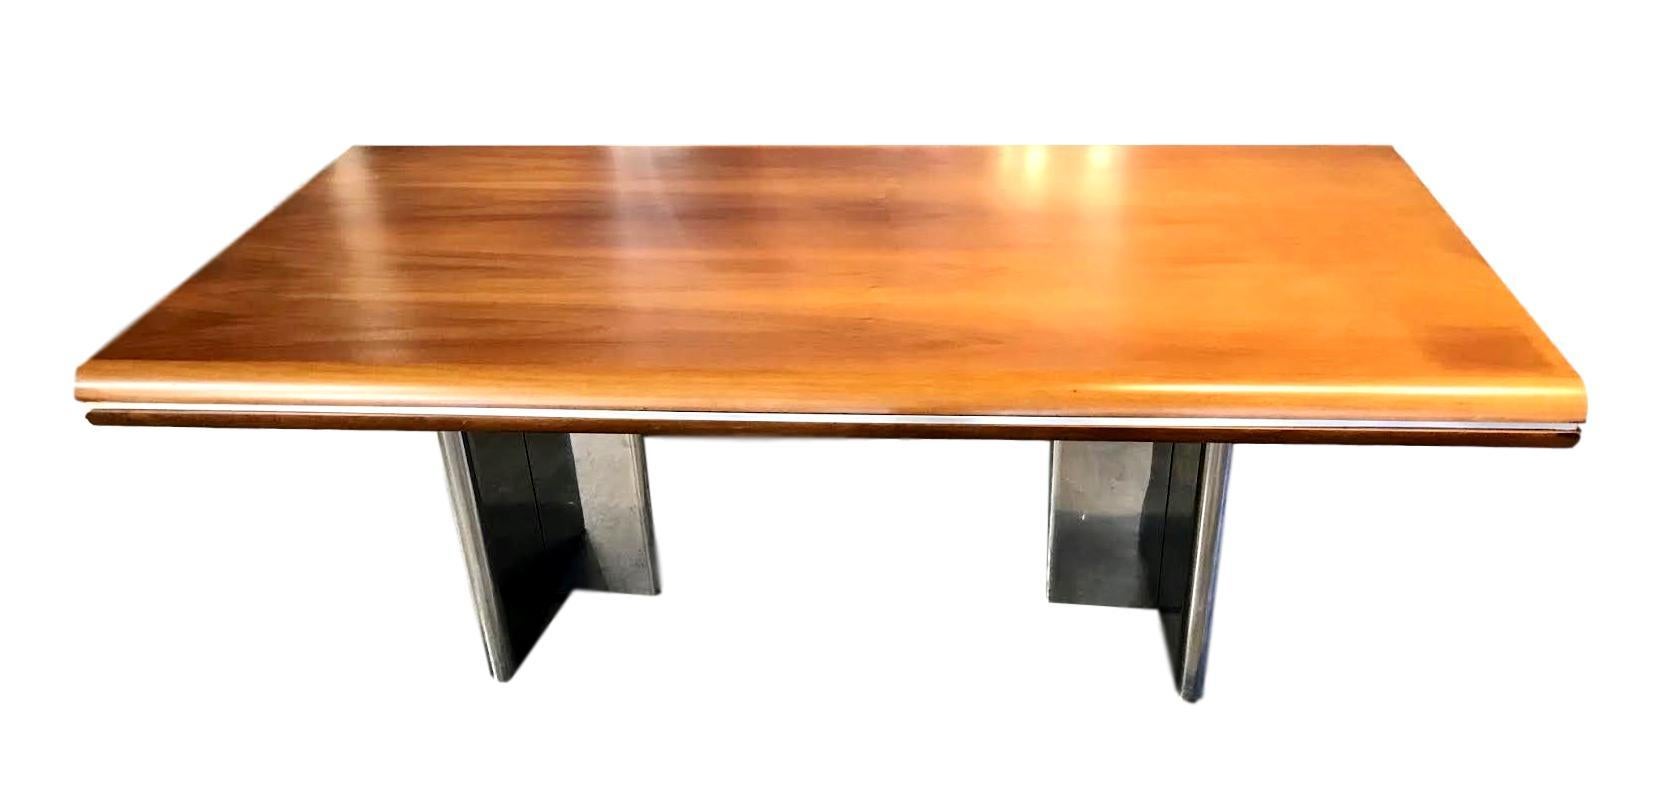 Stunning desk by Hans Von Klier for Skipper. Made in Italy in 1970. Walnut top with three hidden pullout / pull-out drawers. Two polished chrome pedestal bases flank each side. Matching credenza available in separate listing. Hans passed away in